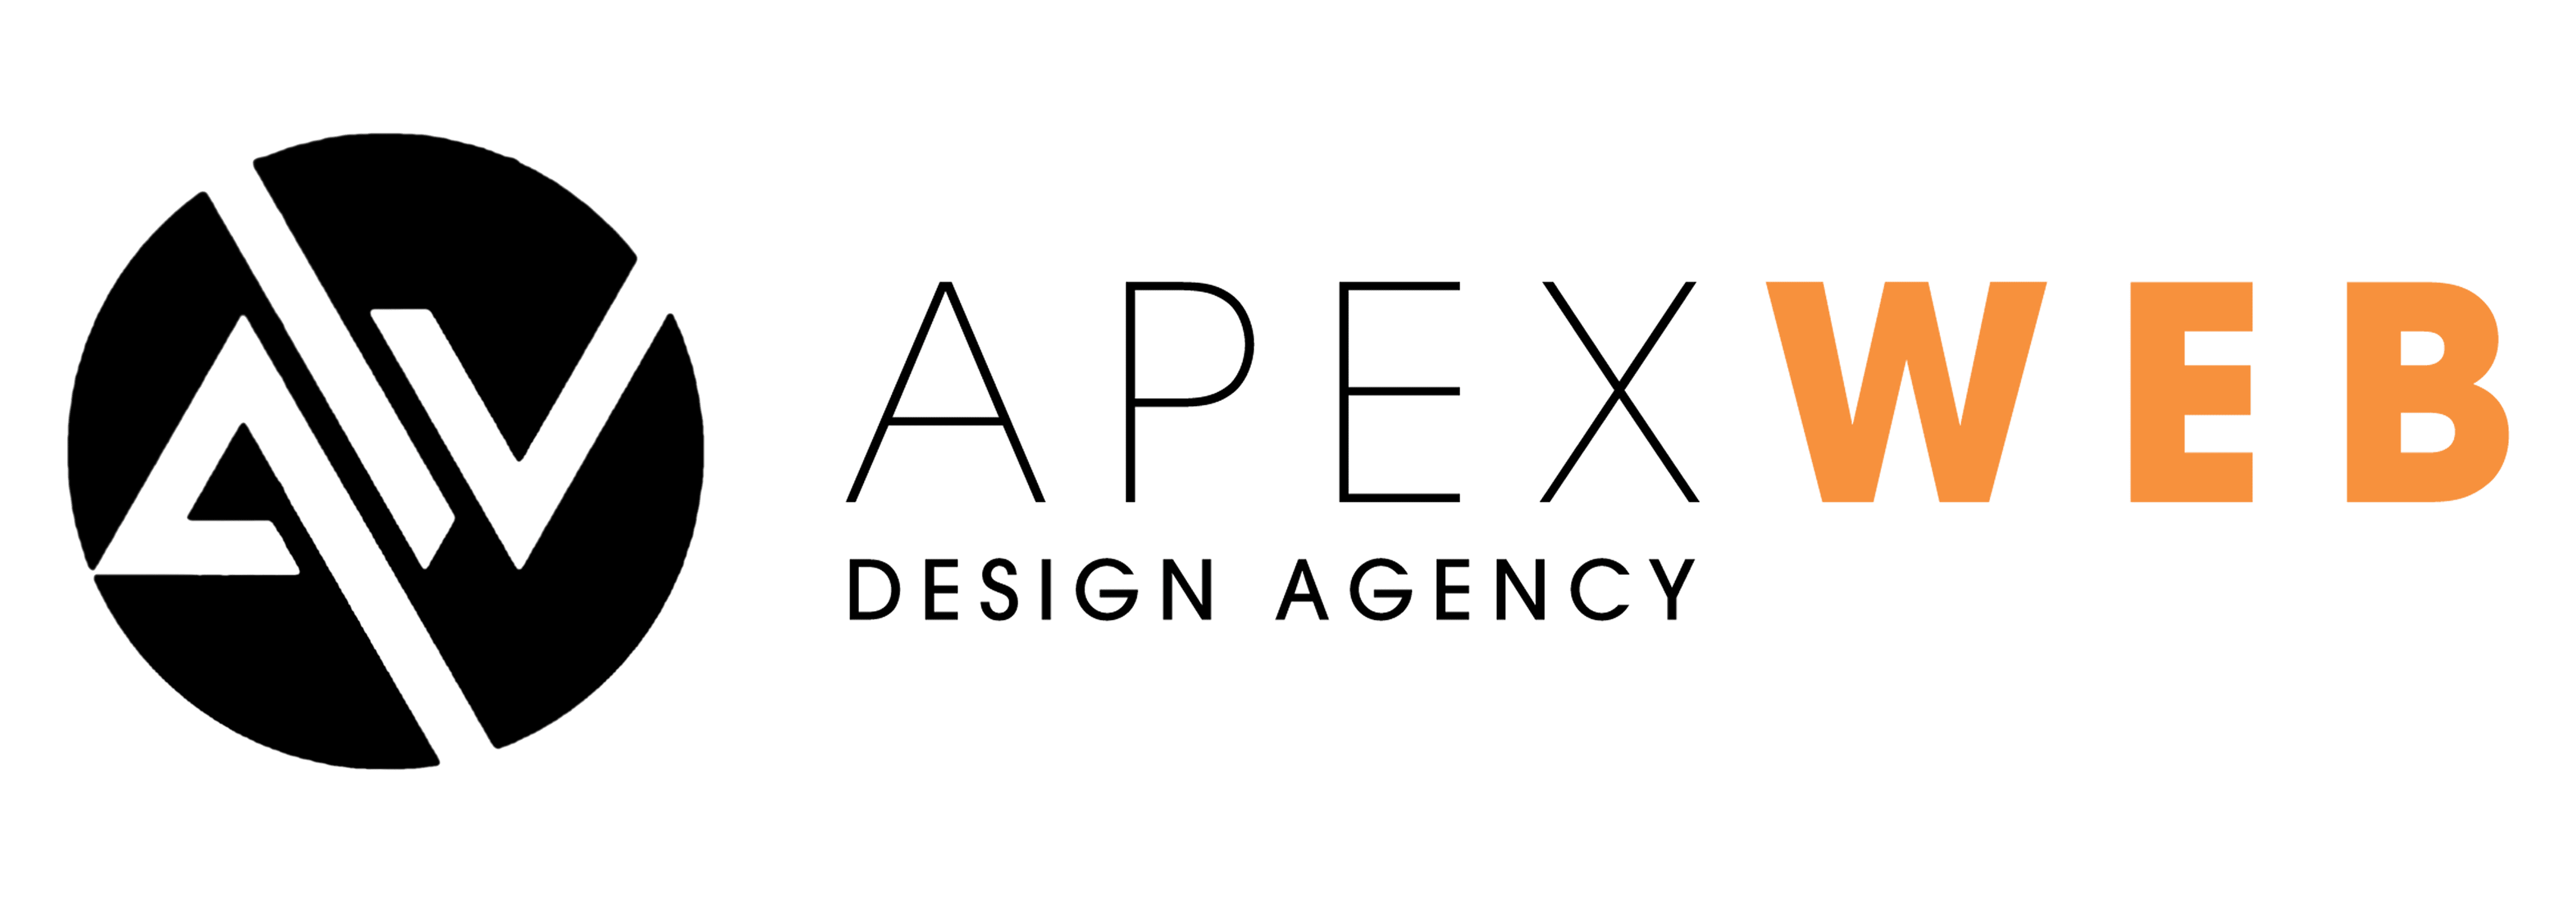 Apex web logo for against light themes. Text in blakc